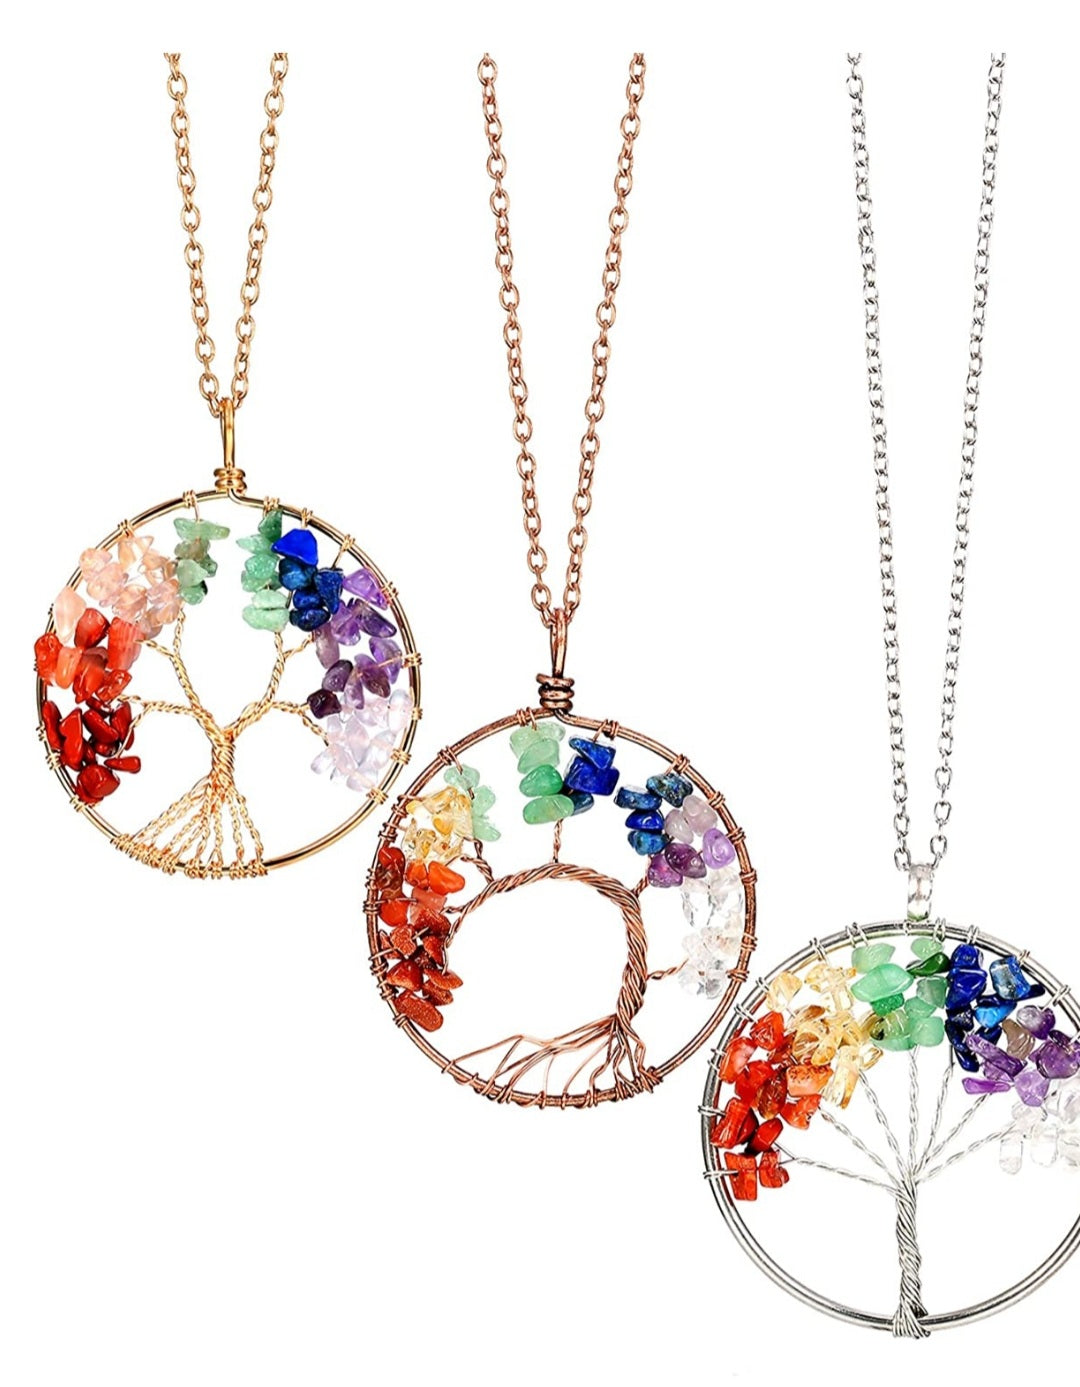 Tree of Life Chakra Necklace - Bredazzled's Store